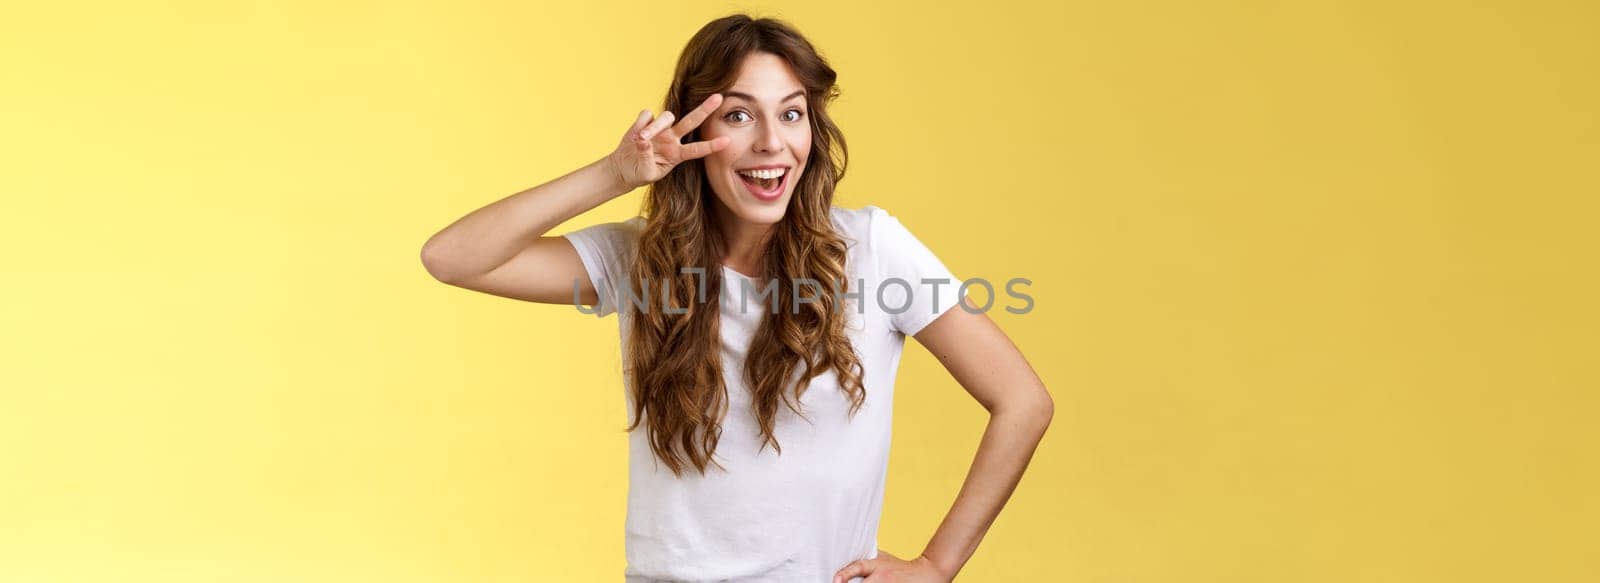 Playful surprised charismatic young caucasian girlfriend having fun look amused enthusiastic show peace victory sign laughing smiling joyfully enjoy summer holidays touch hip stand yellow background. Lifestyle.